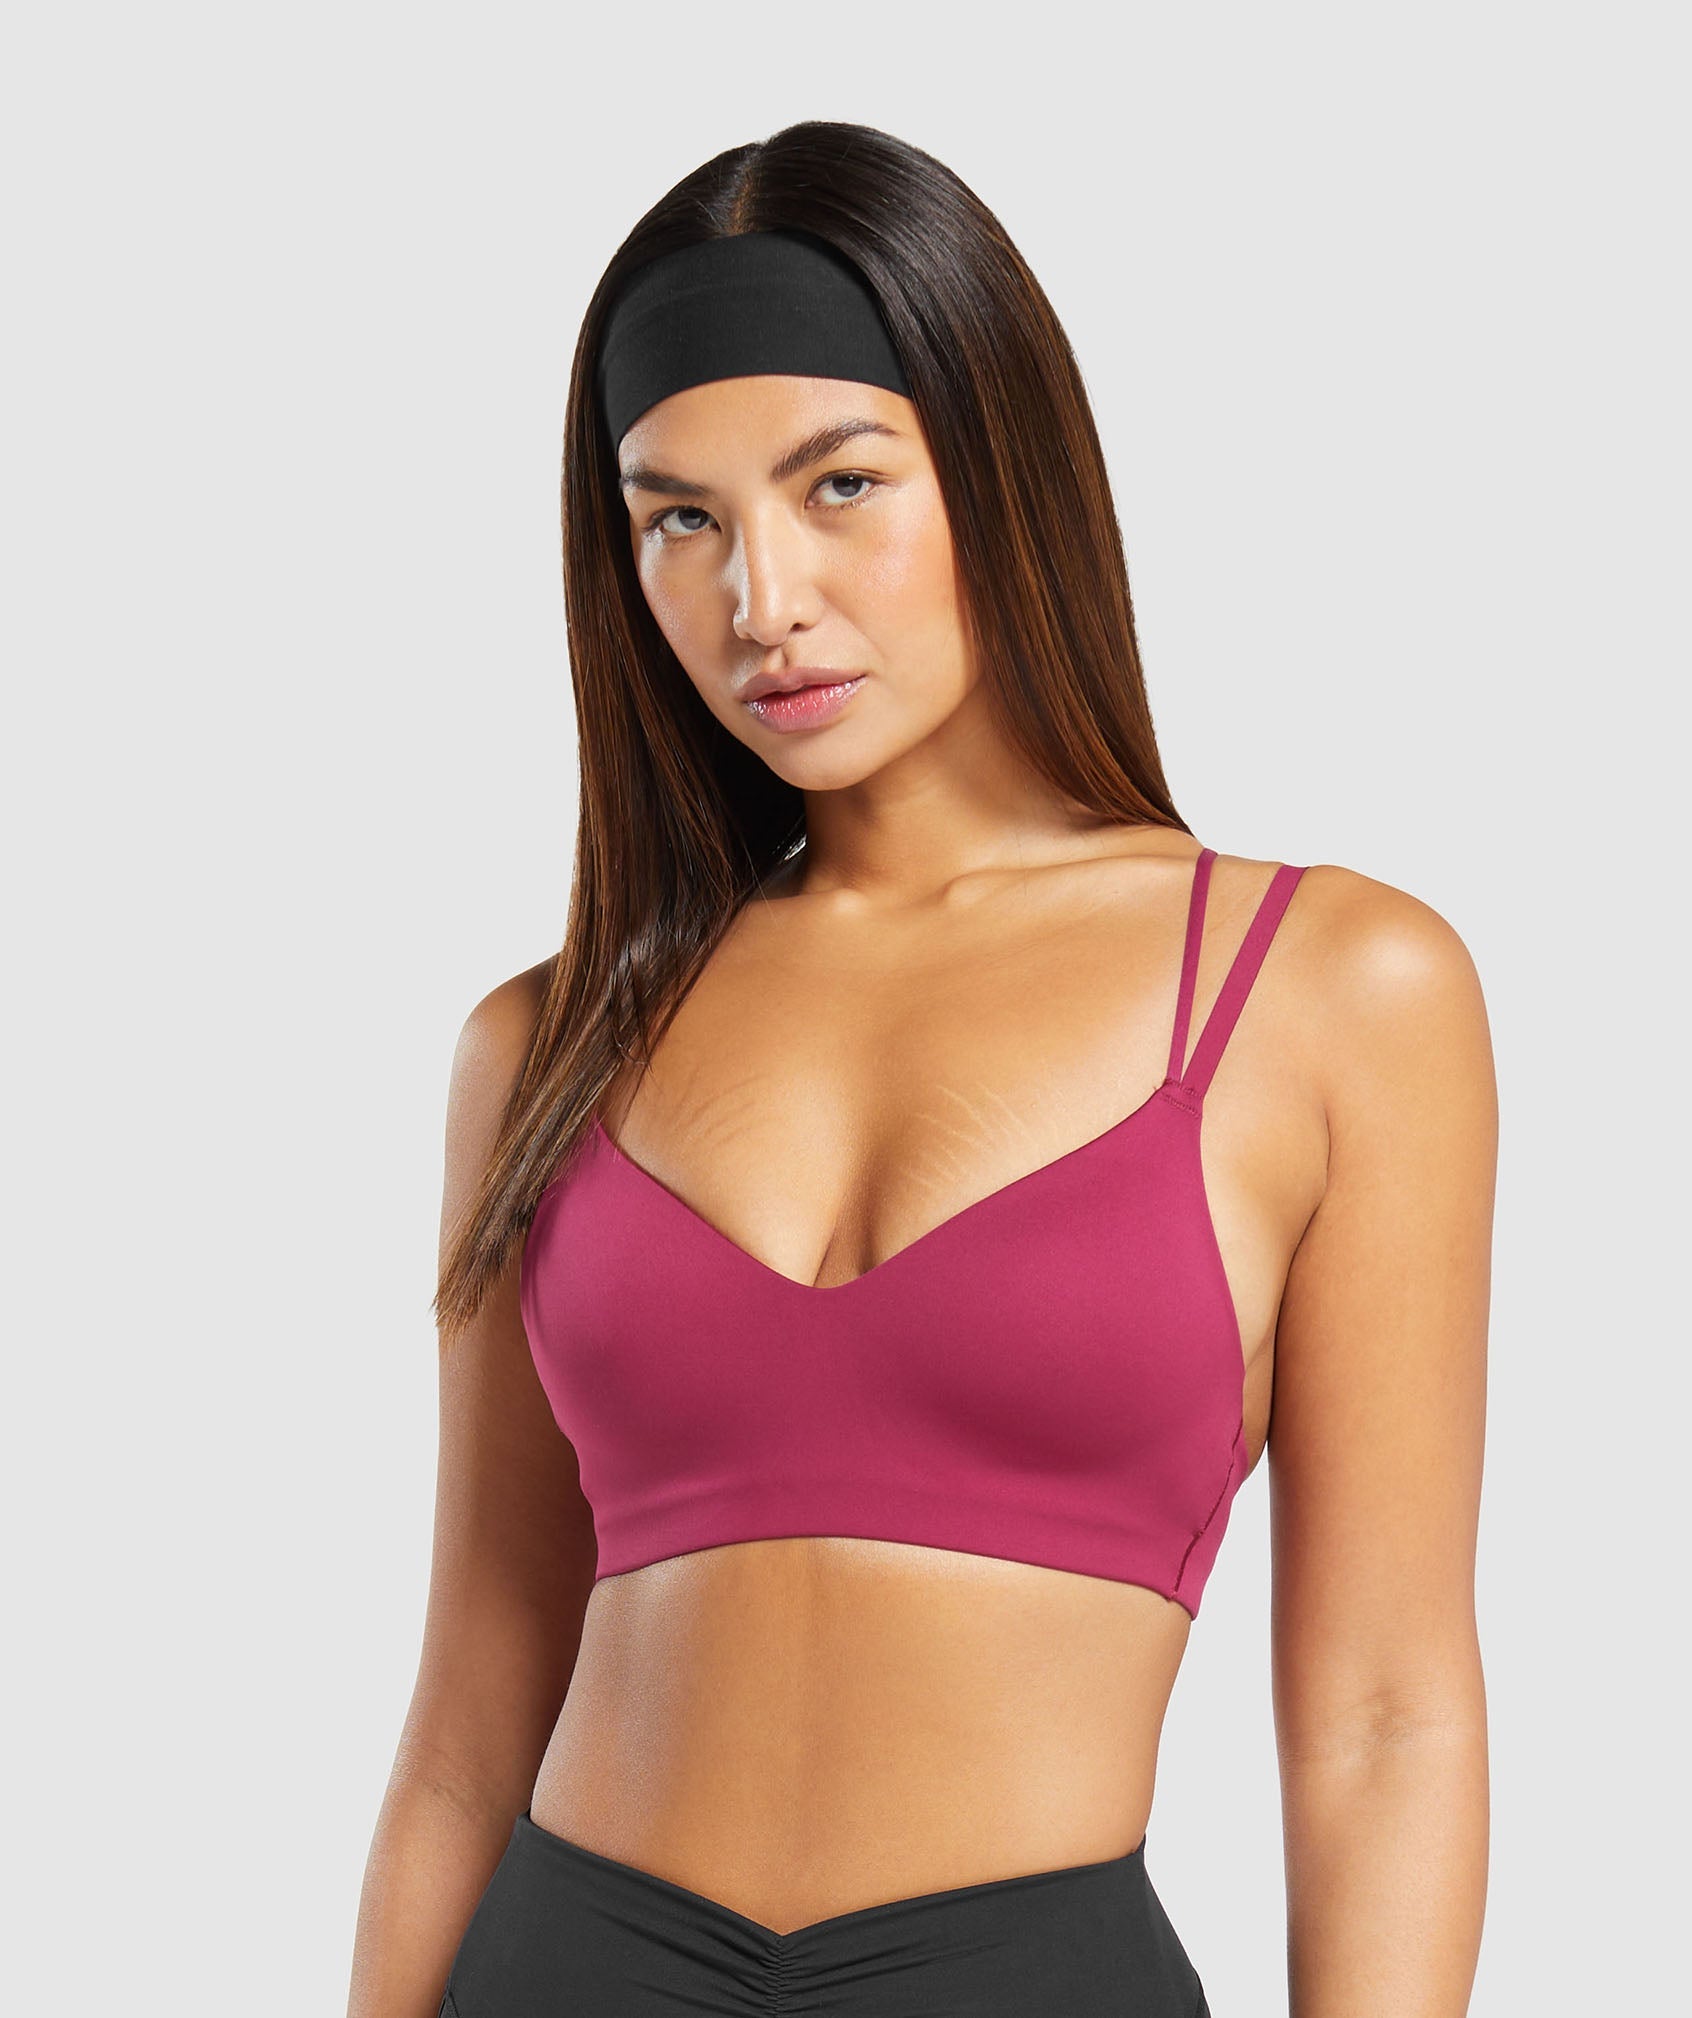 Super Soft Strappy Back Bra Color Theory - Happy Pink, Women's Sports Bras